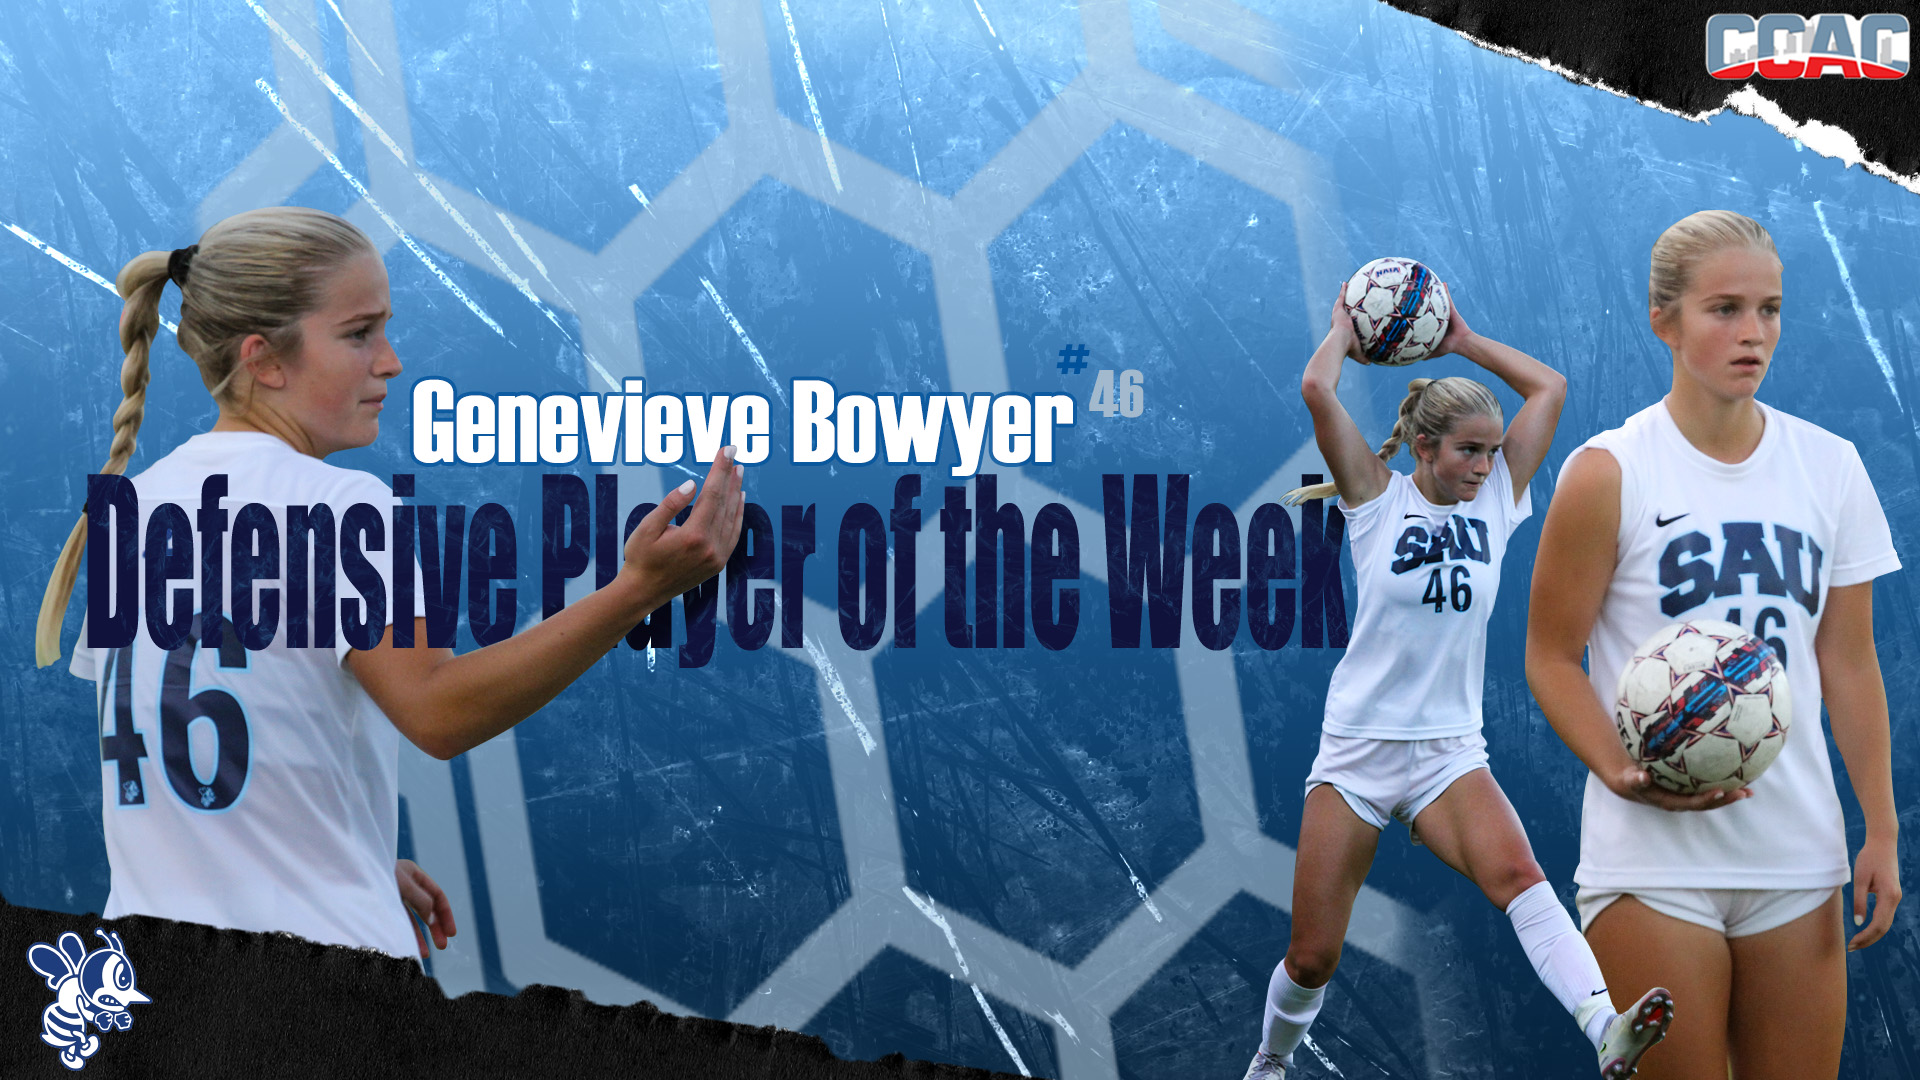 Bowyer tabbed as CCAC Defensive Player of the Week